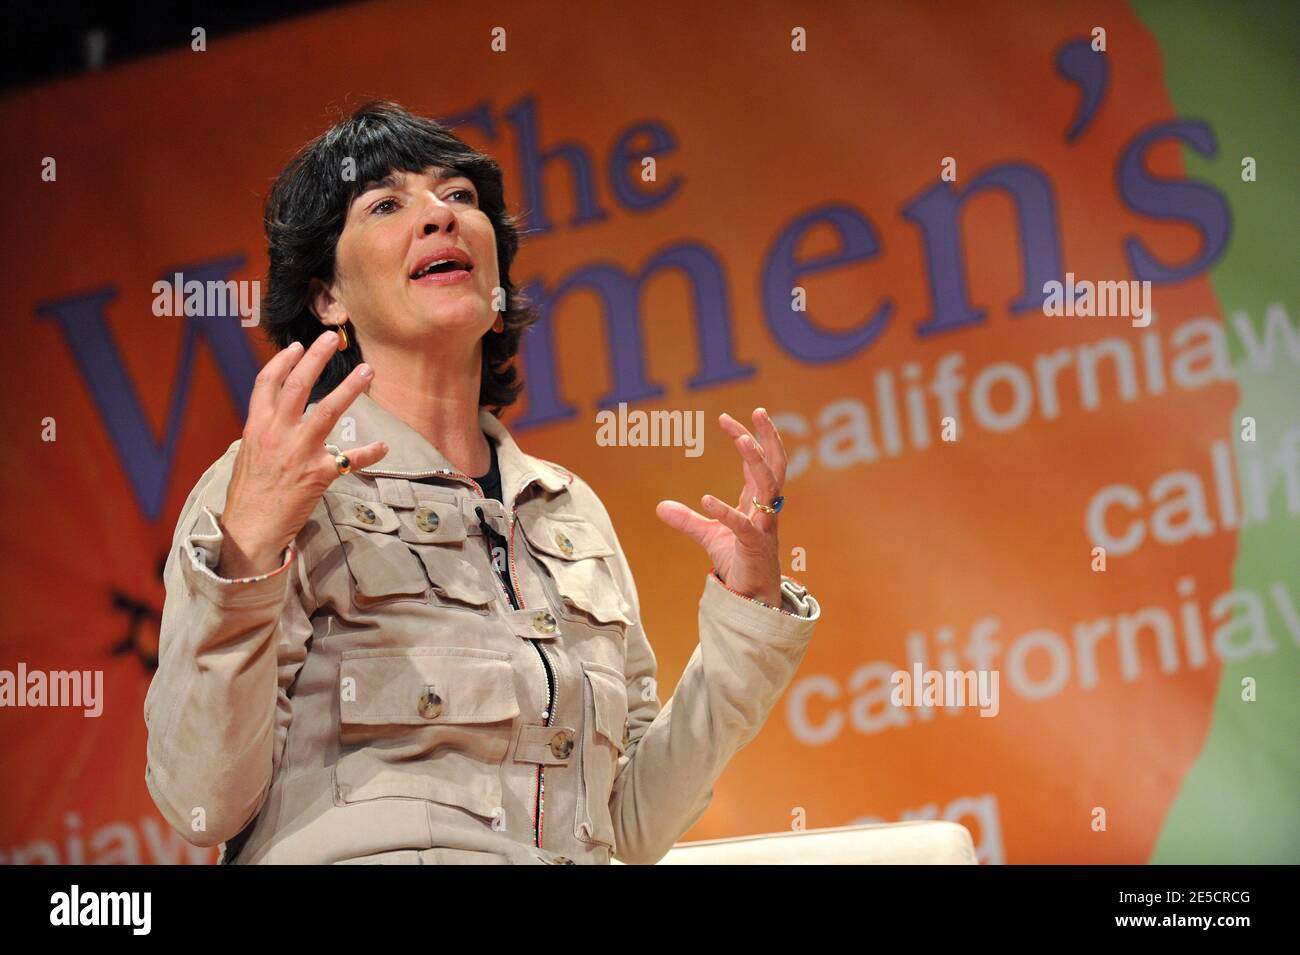 Christiane Amanpour, CNN's chief international correspondent, attends The Women's Conference 2008 held at the Long Beach Convention Center in Los Angeles, CA, USA on October 22, 2008. Photo by Lionel Hahn/ABACAPRESS.COM Stock Photo